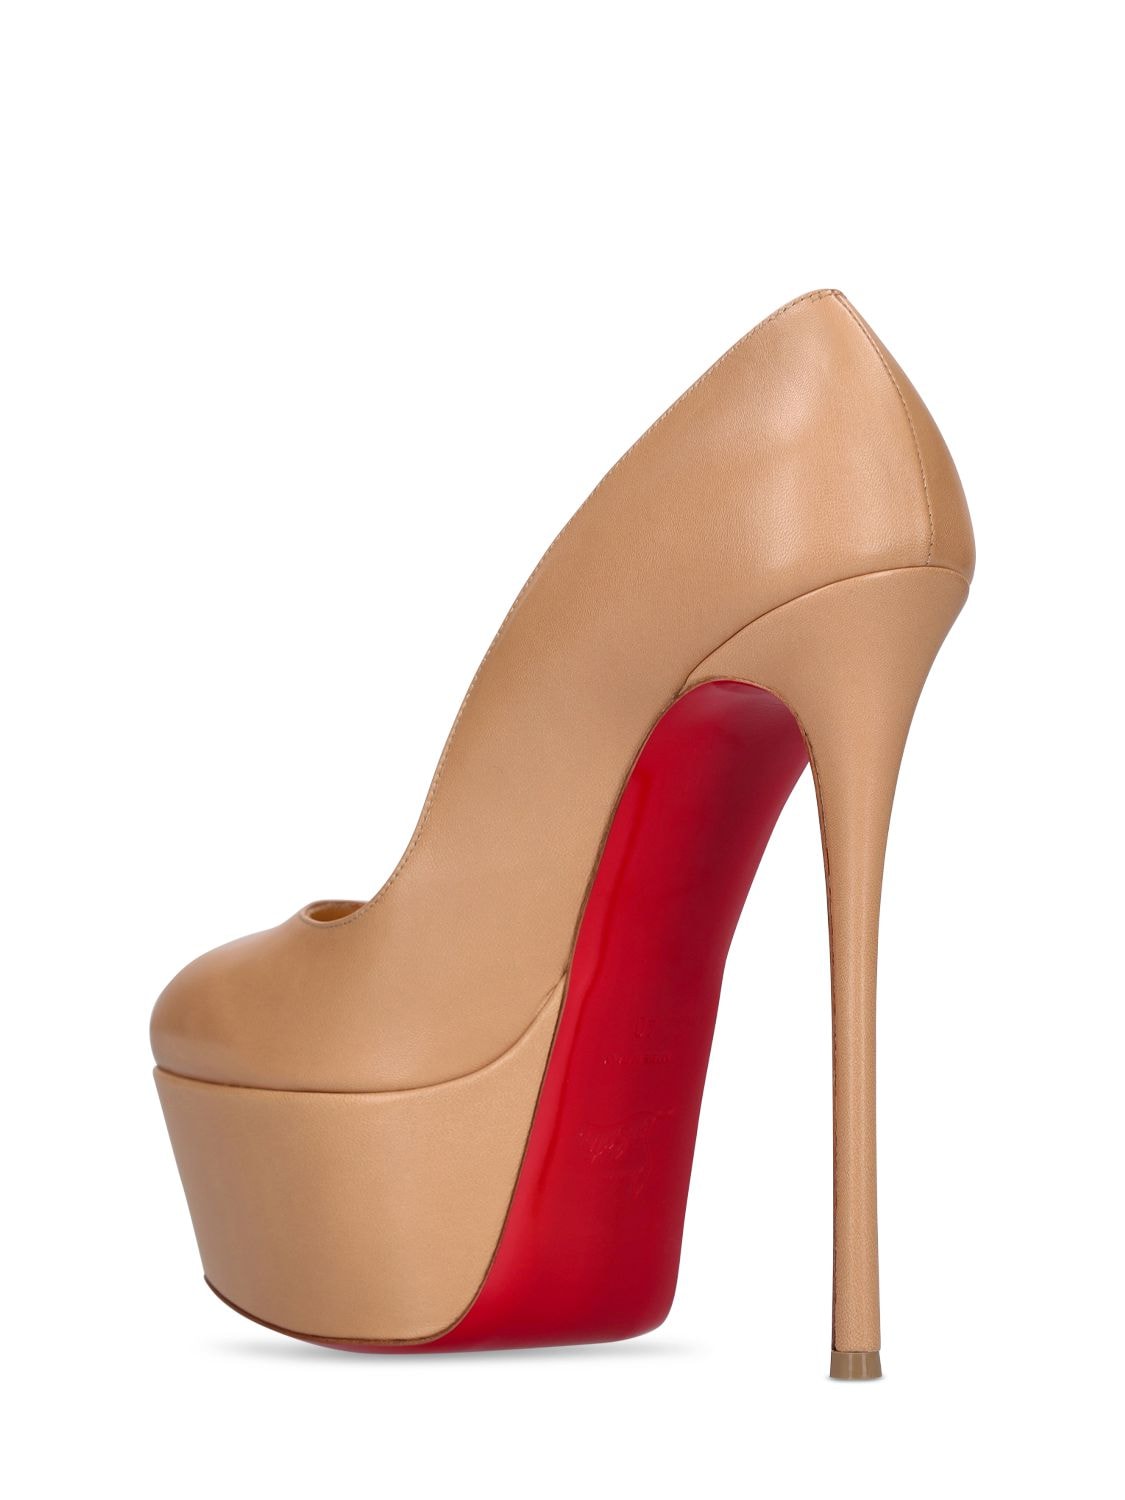 Dolly Leather Red Sole Platform Pumps